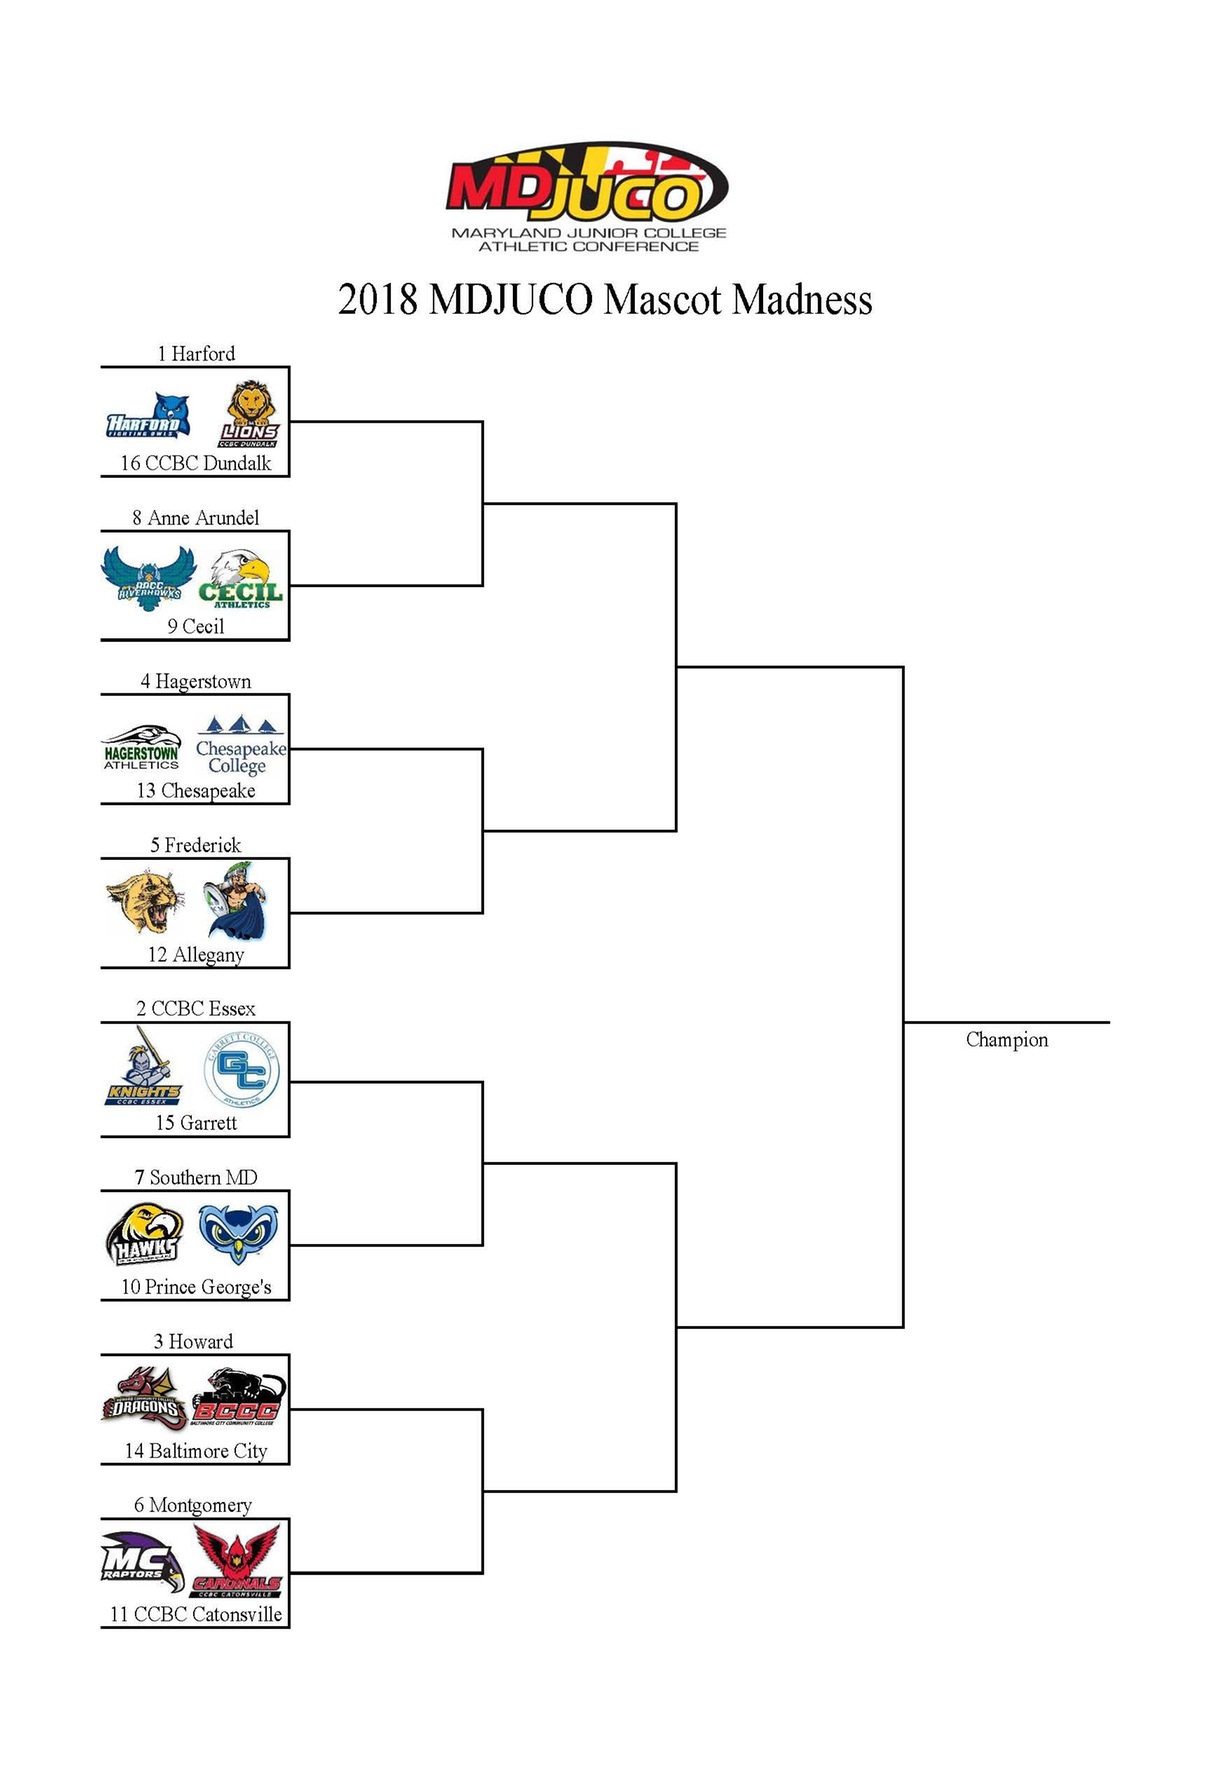 2018 Maryland JUCO Mascot Challenge: Vote Now on Twitter